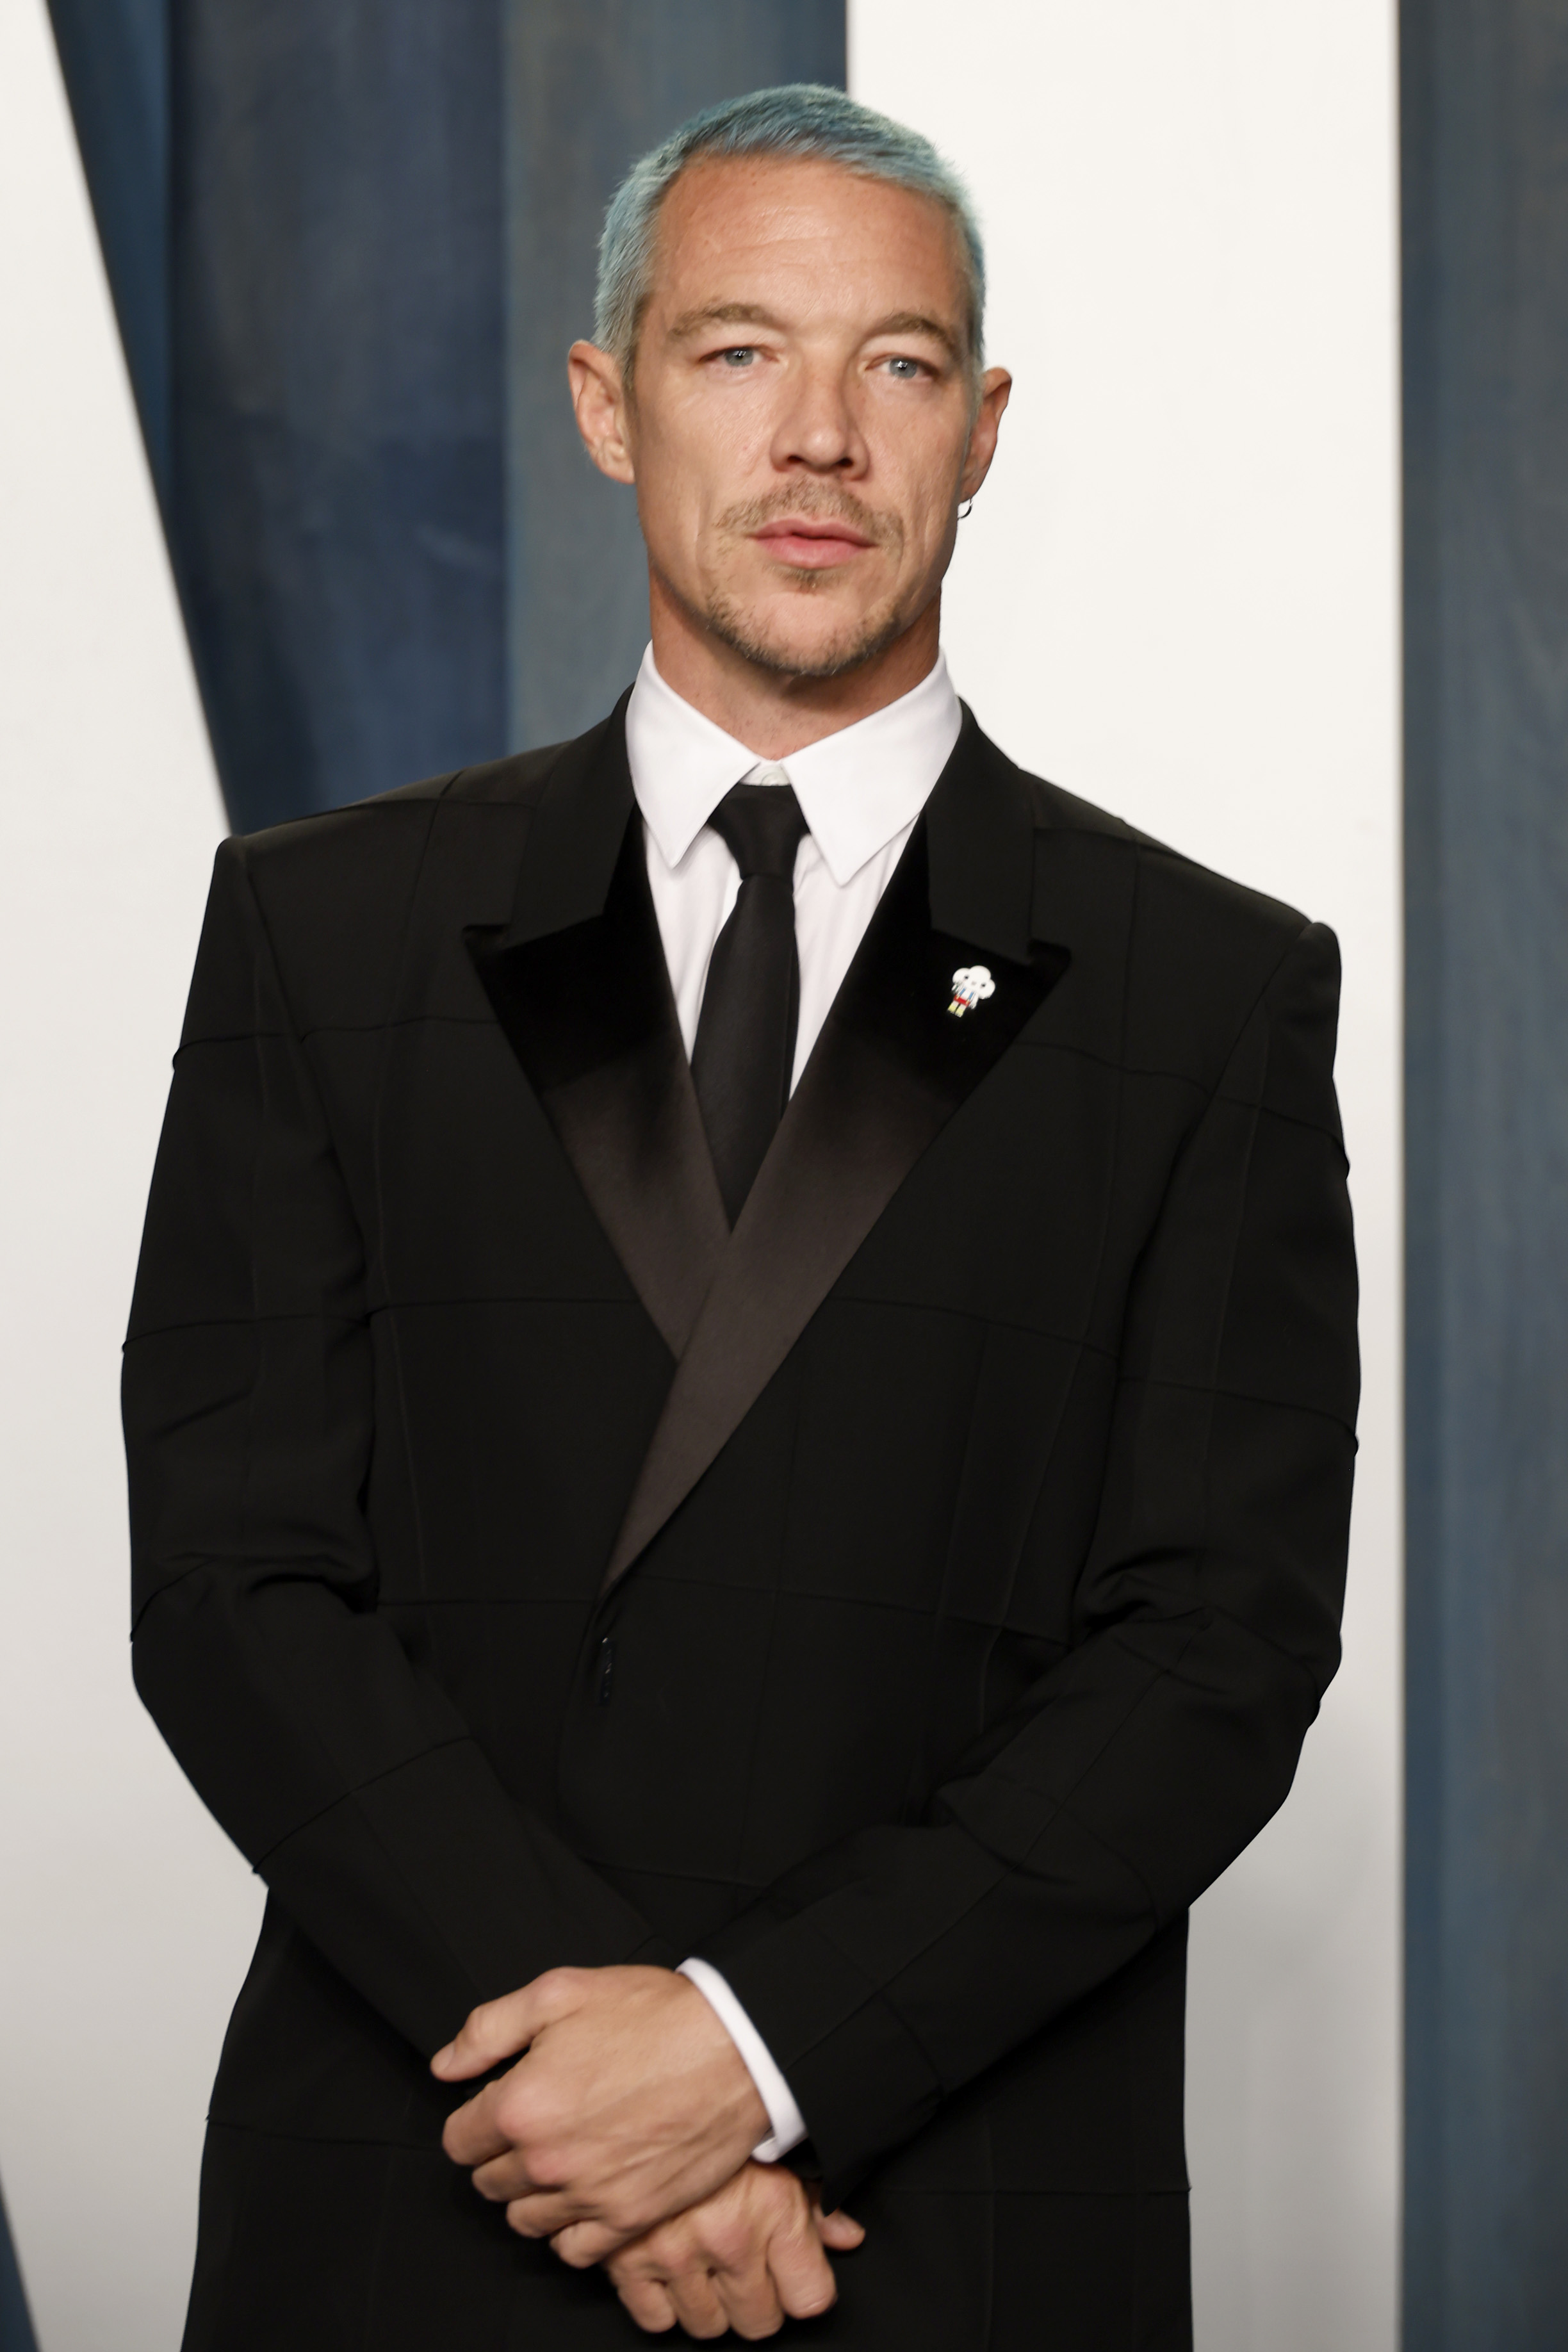 Diplo at the 2022 Vanity Fair Oscar Party on March 27, 2022, in Beverly Hills, California. | Source: Getty Images